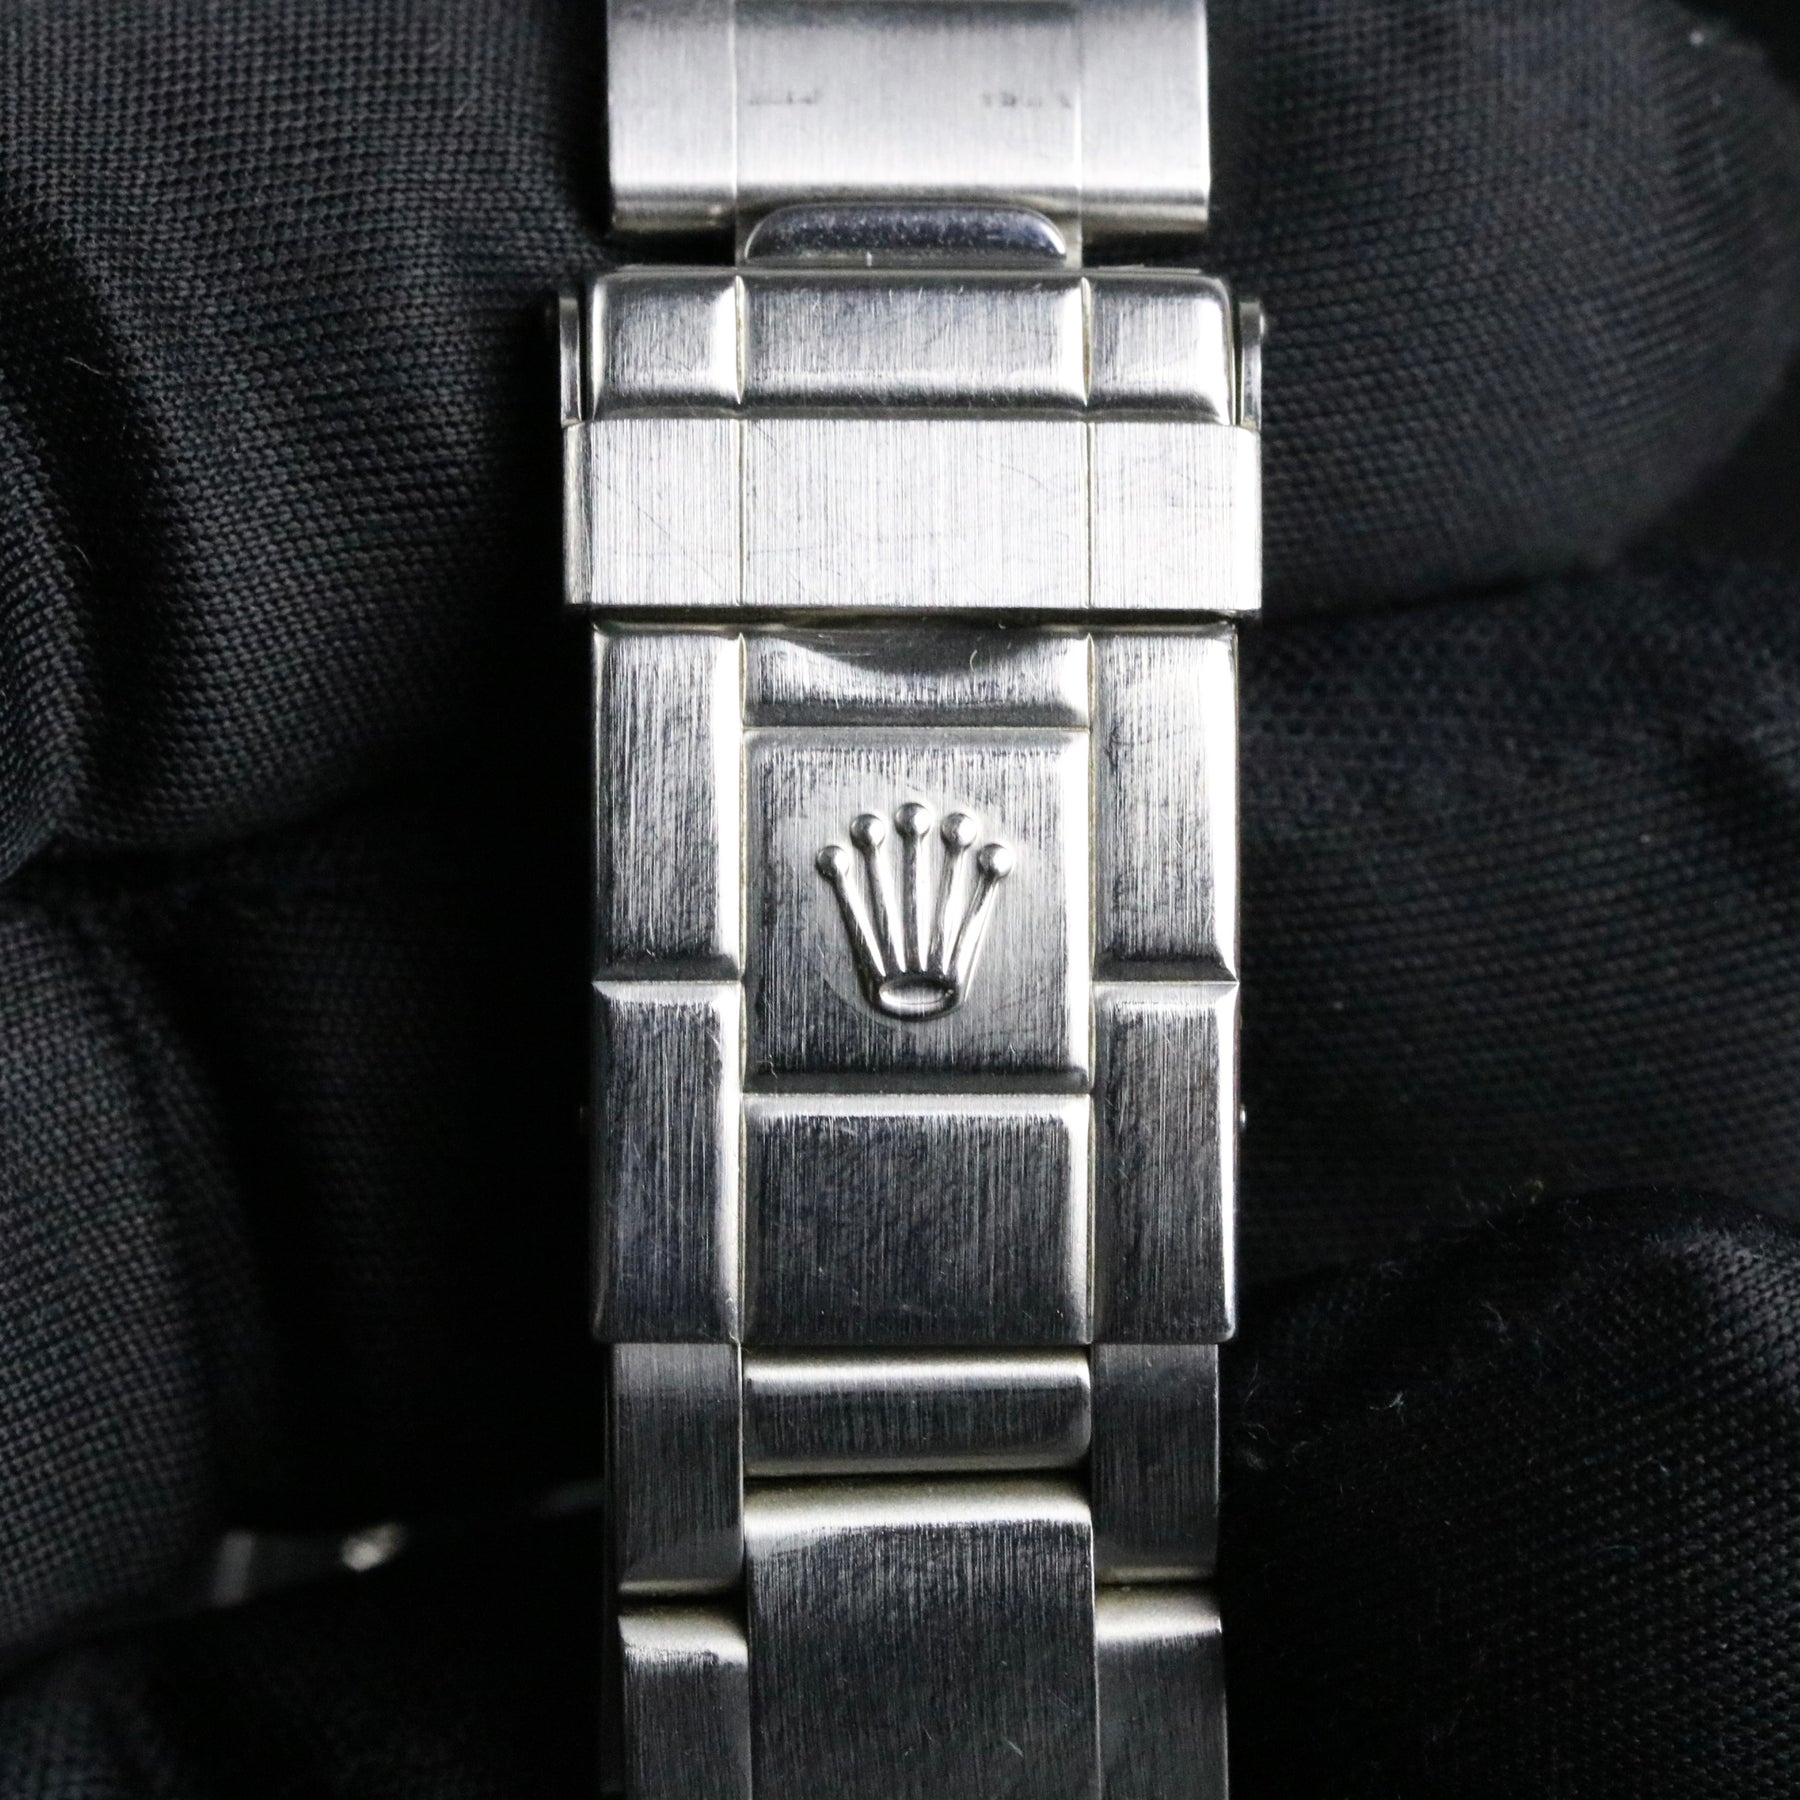 2006 Rolex 114270 Explorer 36mm with Card